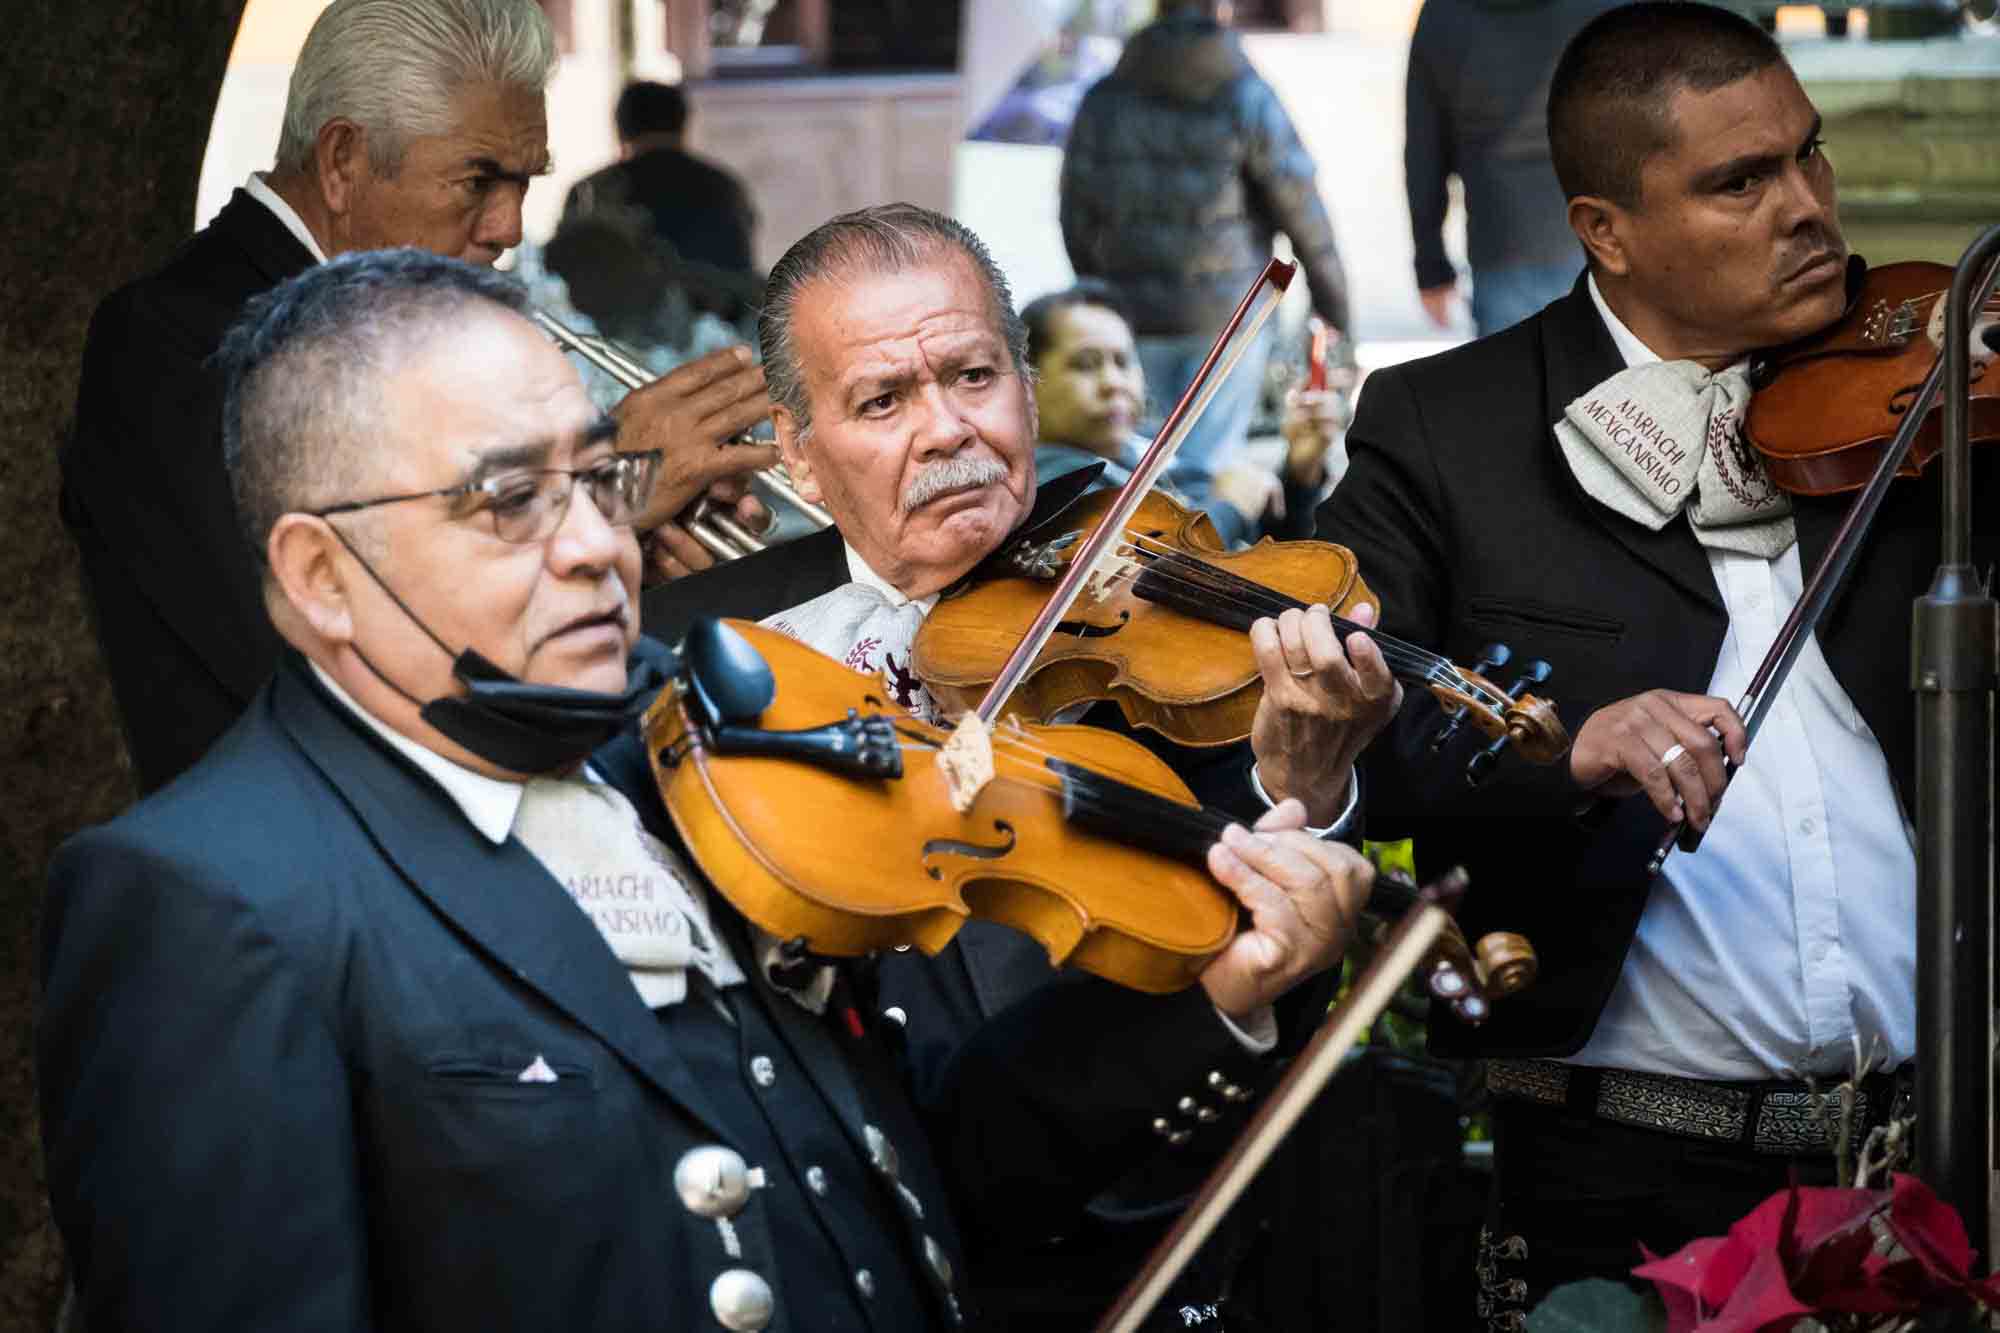 A group of mariachi musicians play outside in Guanajuato